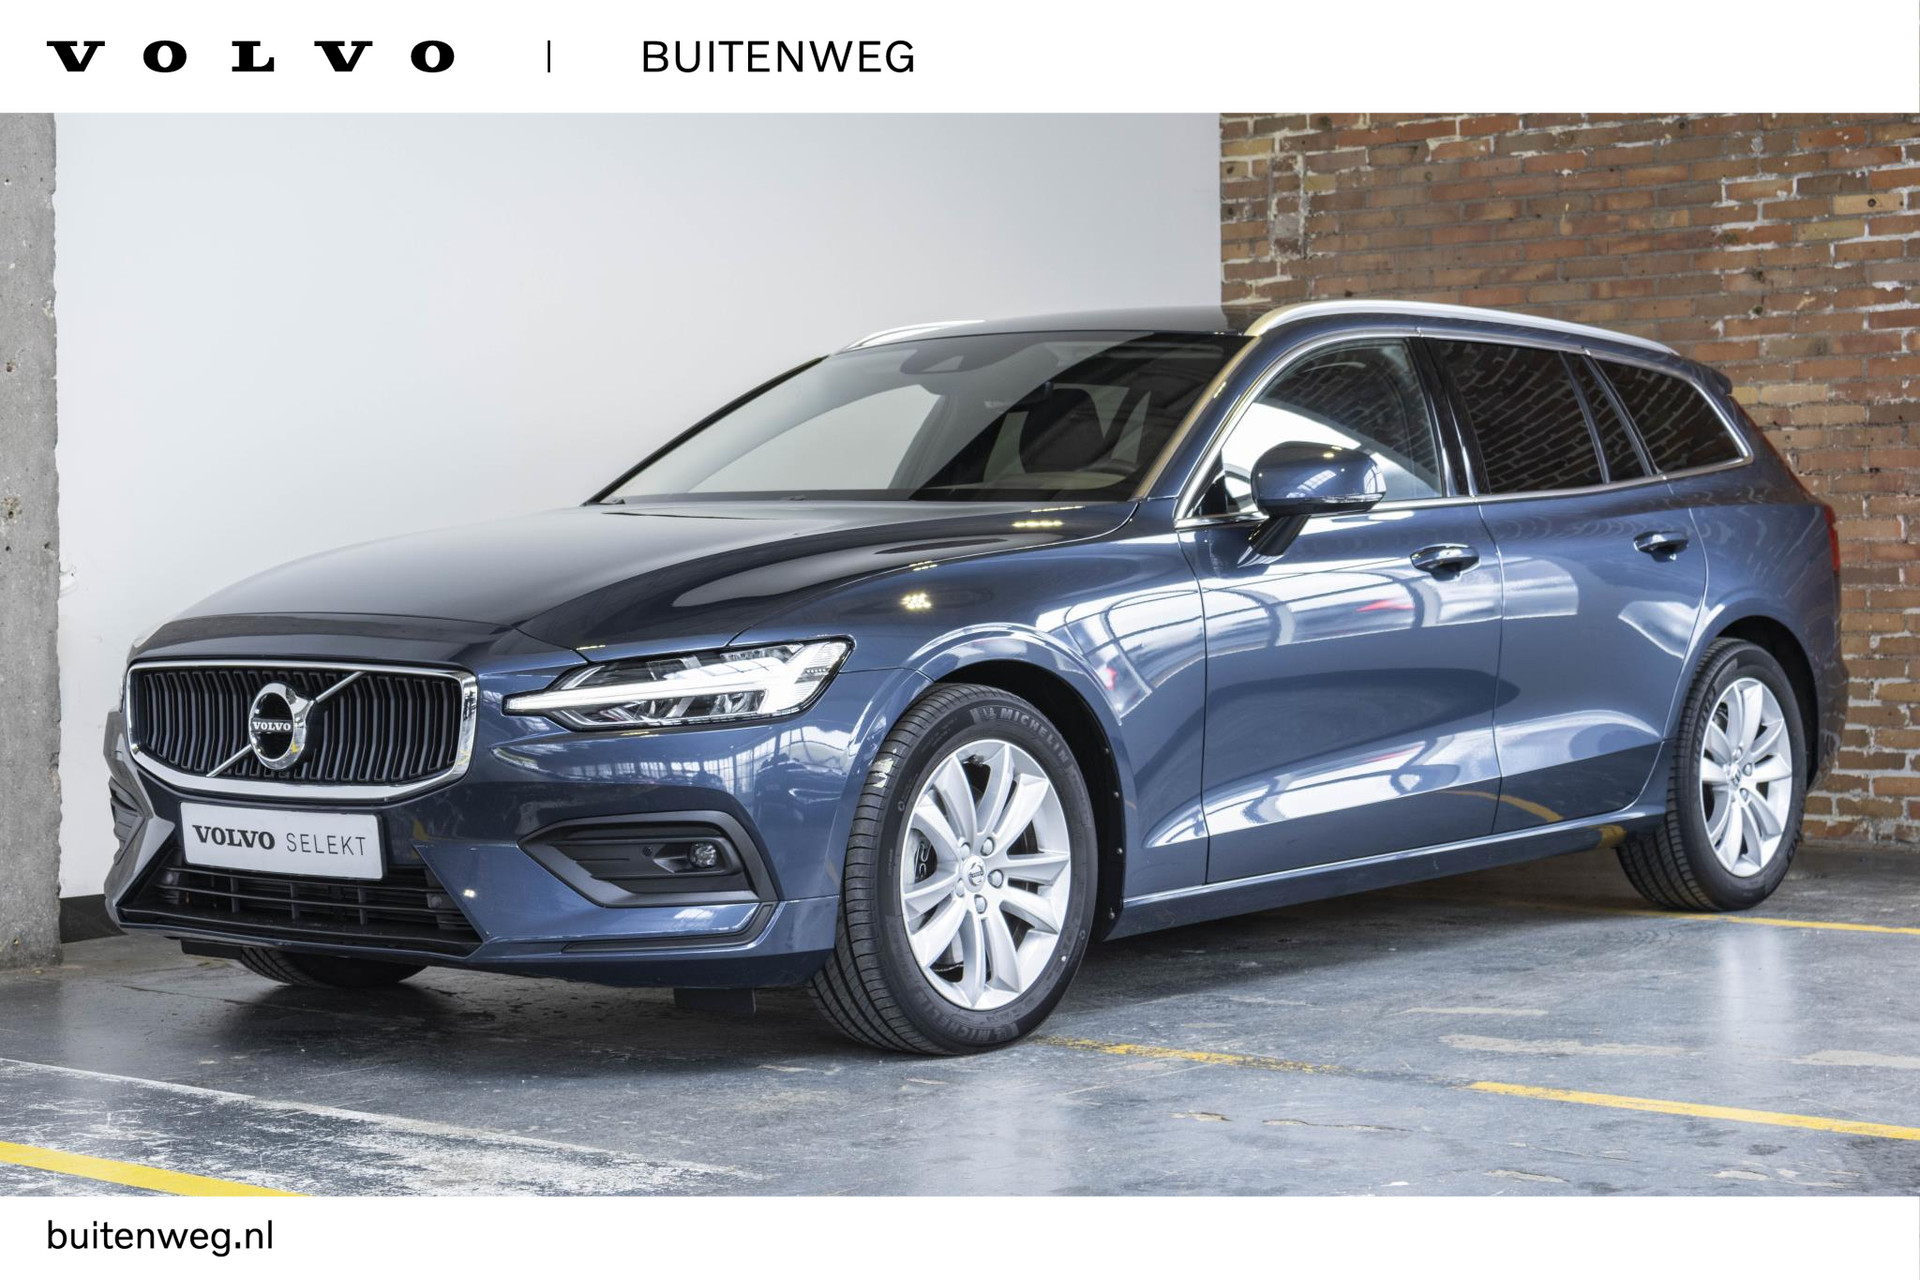 Volvo V60 B4 Automaat Business Pro | Blind Spot | Parkeercamera | Park Assist voor en achter | Adaptive cruise control | Extra getint glas | Keyless entree